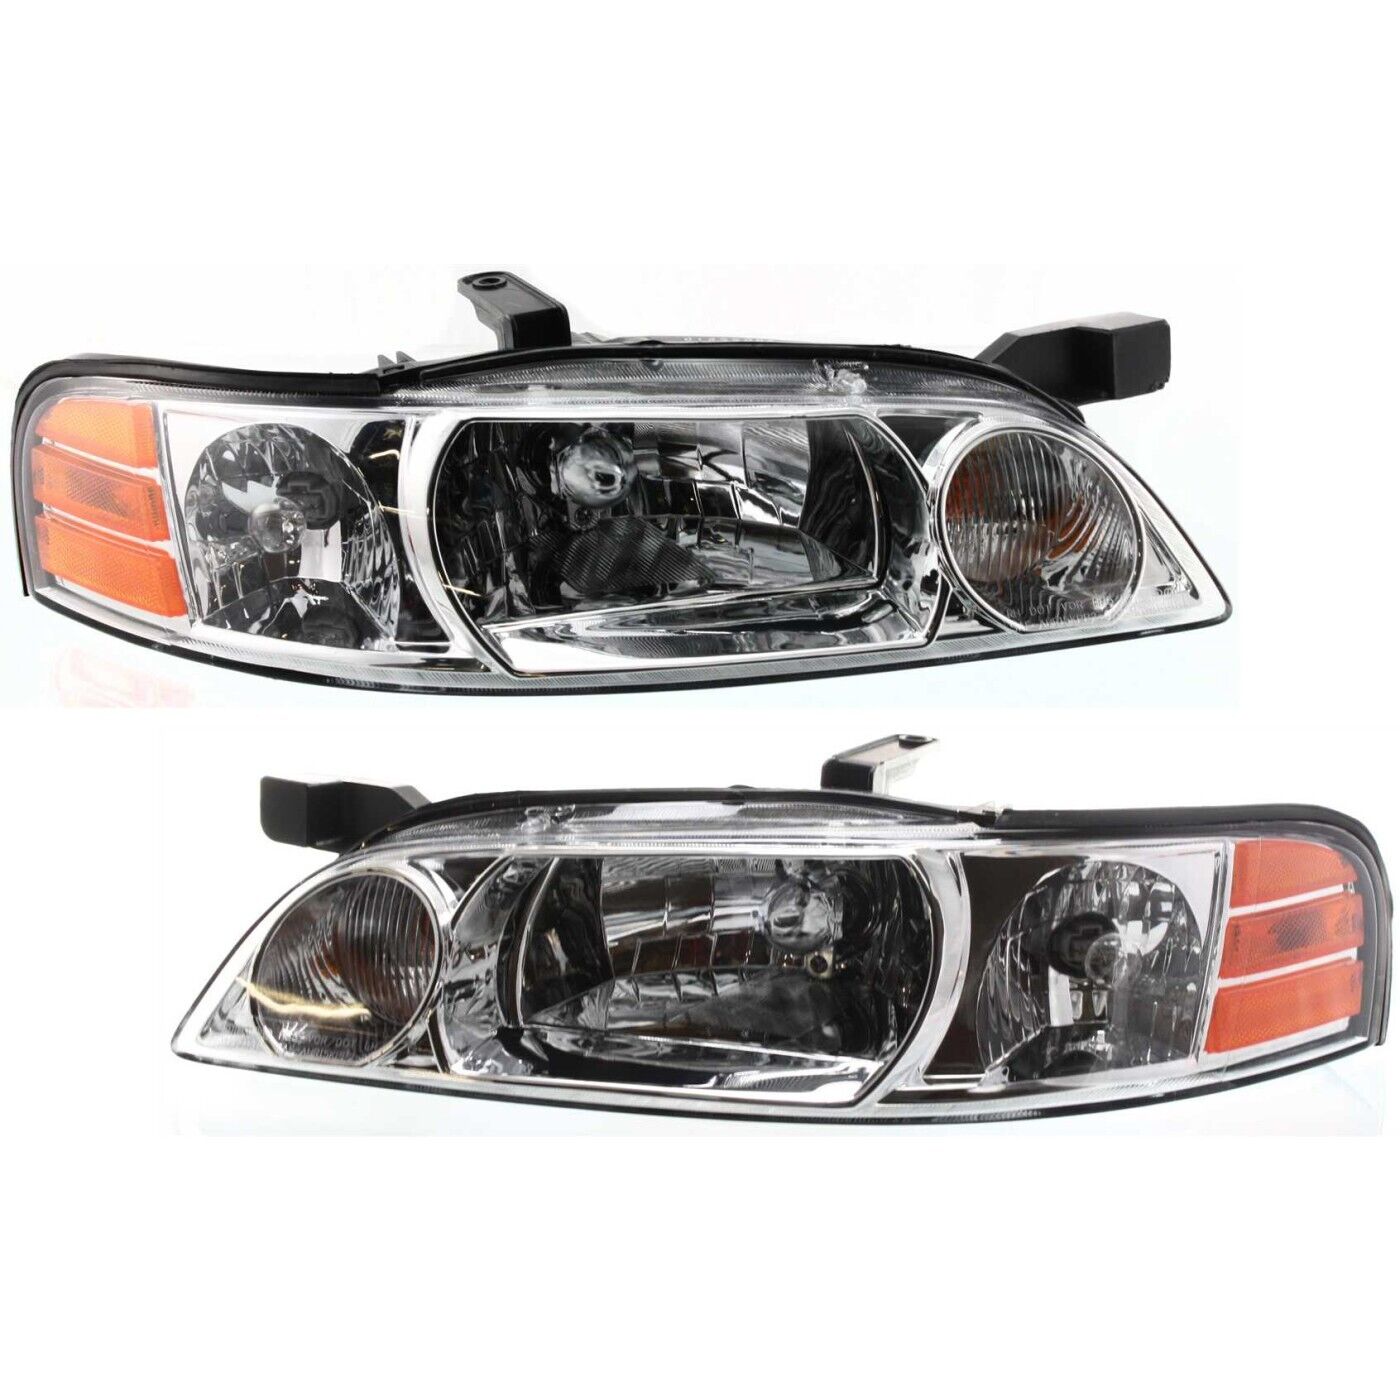 Headlight Set For 2000-2001 Nissan Altima Left and Right With Bulb 2Pc